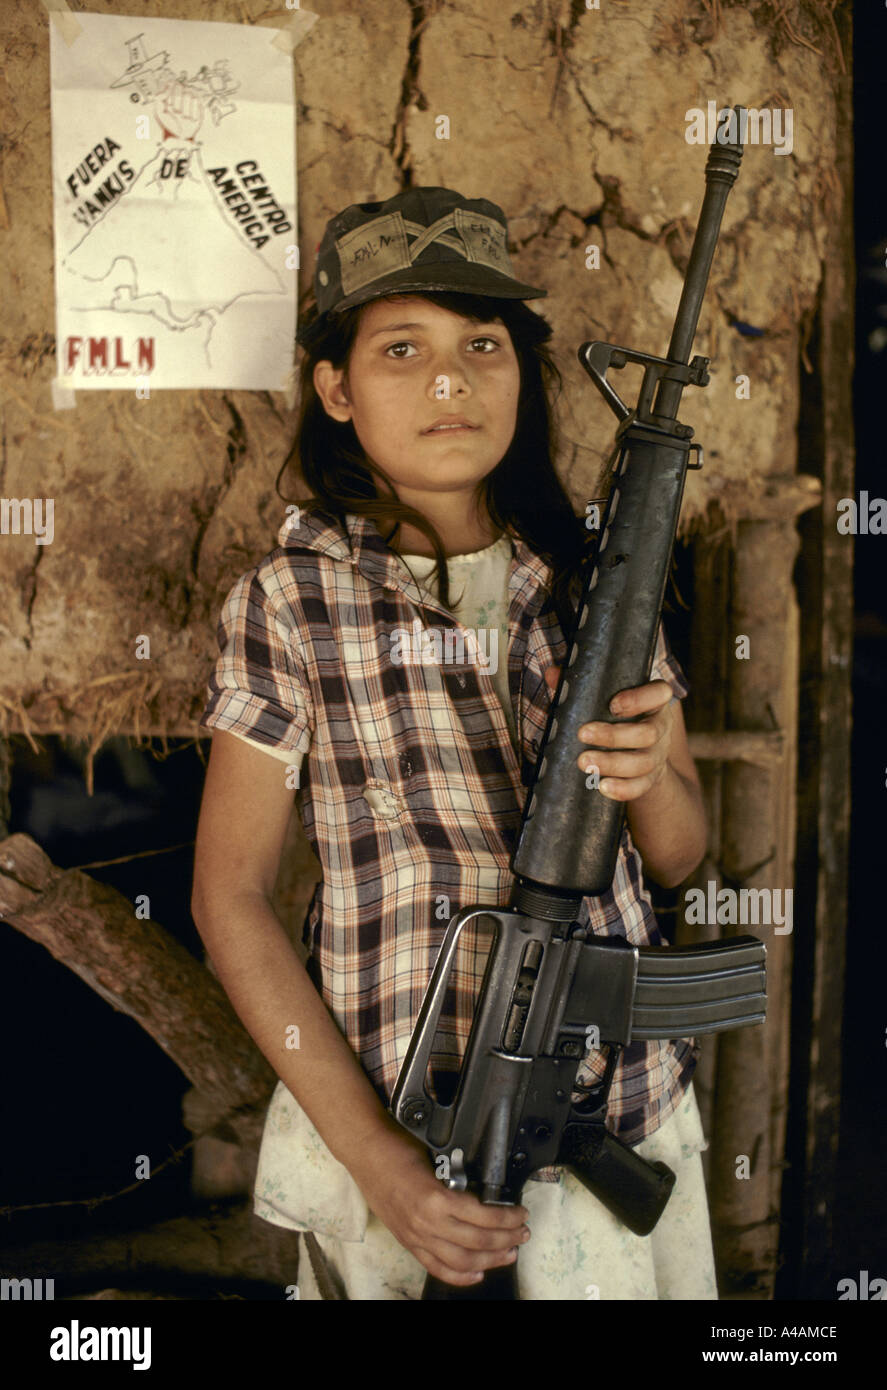 CHALATENANGO,   EL SALVADOR, FEB 1984: - Within the FPL Guerrilla's Zones of Control - A young girl holds an M16 rifle. Stock Photo